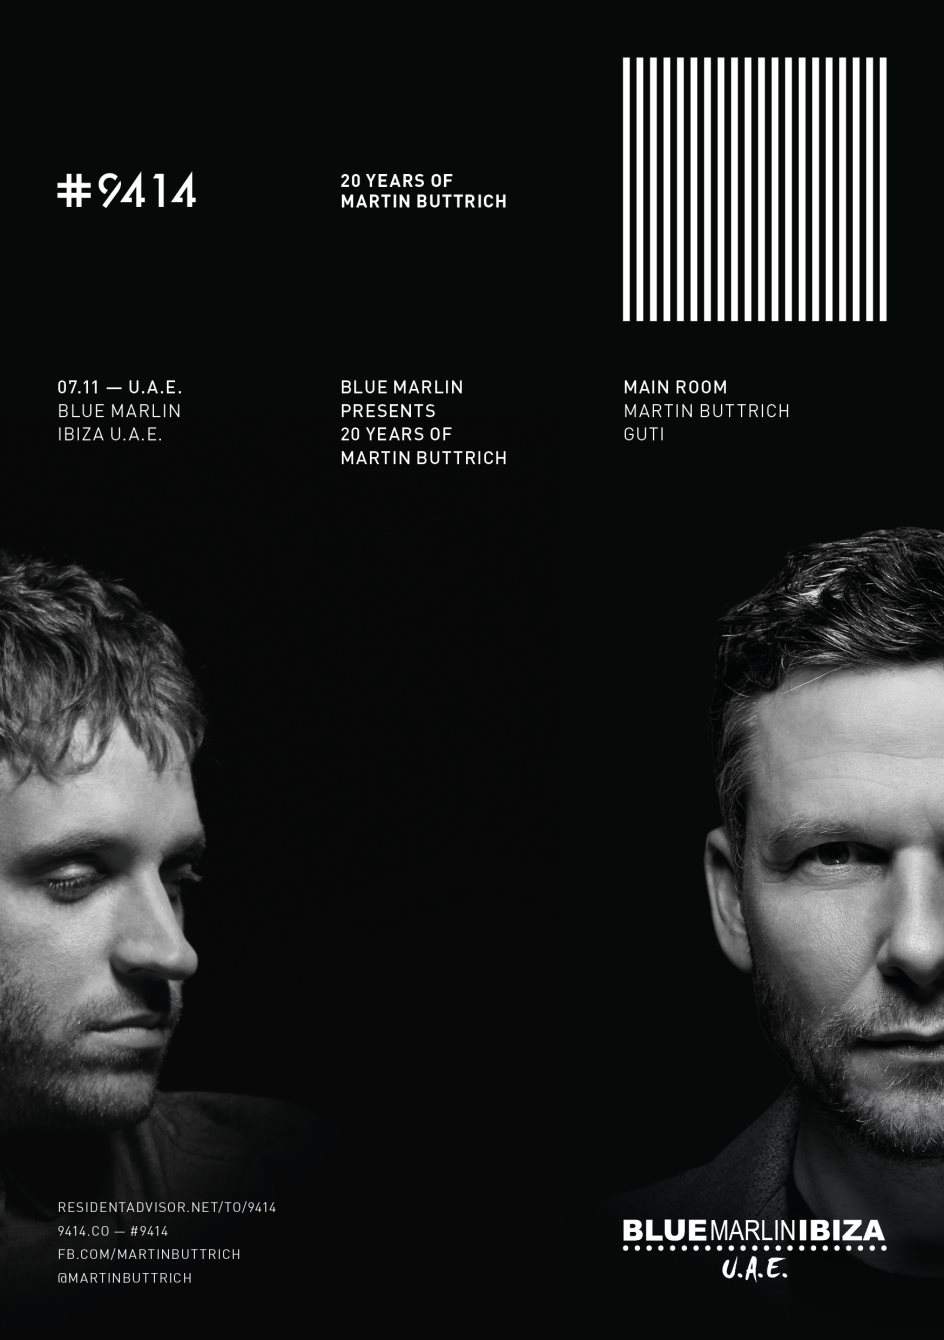 #9414 20 Years of Martin Buttrich Tour with Guti - Página frontal